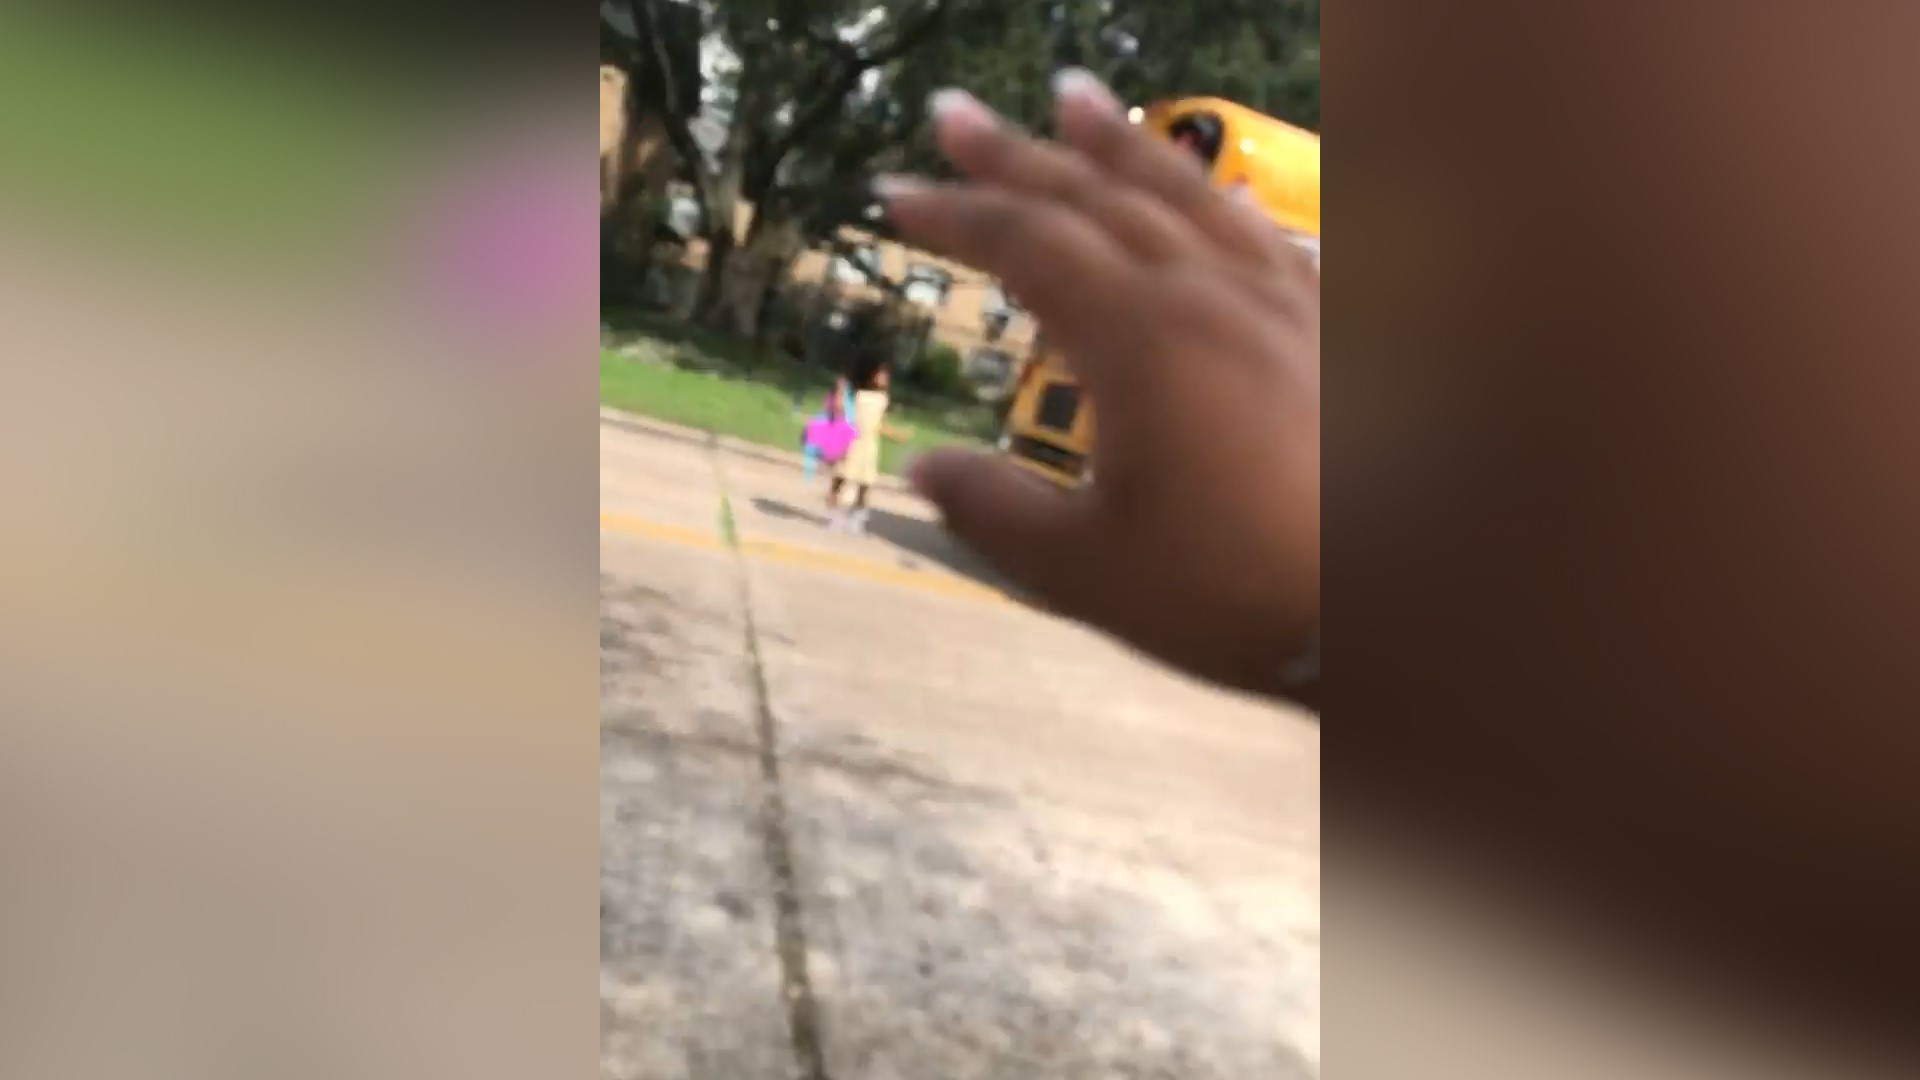 The Facebook video shows her child getting off the school bus and starting to cross the street when a small blue Toyota sedan fails to stop. The little girl is about to cross the street when the mother screams “stop!” The mom wants people to share the video as a warning - we should all follow the law and protect our children.